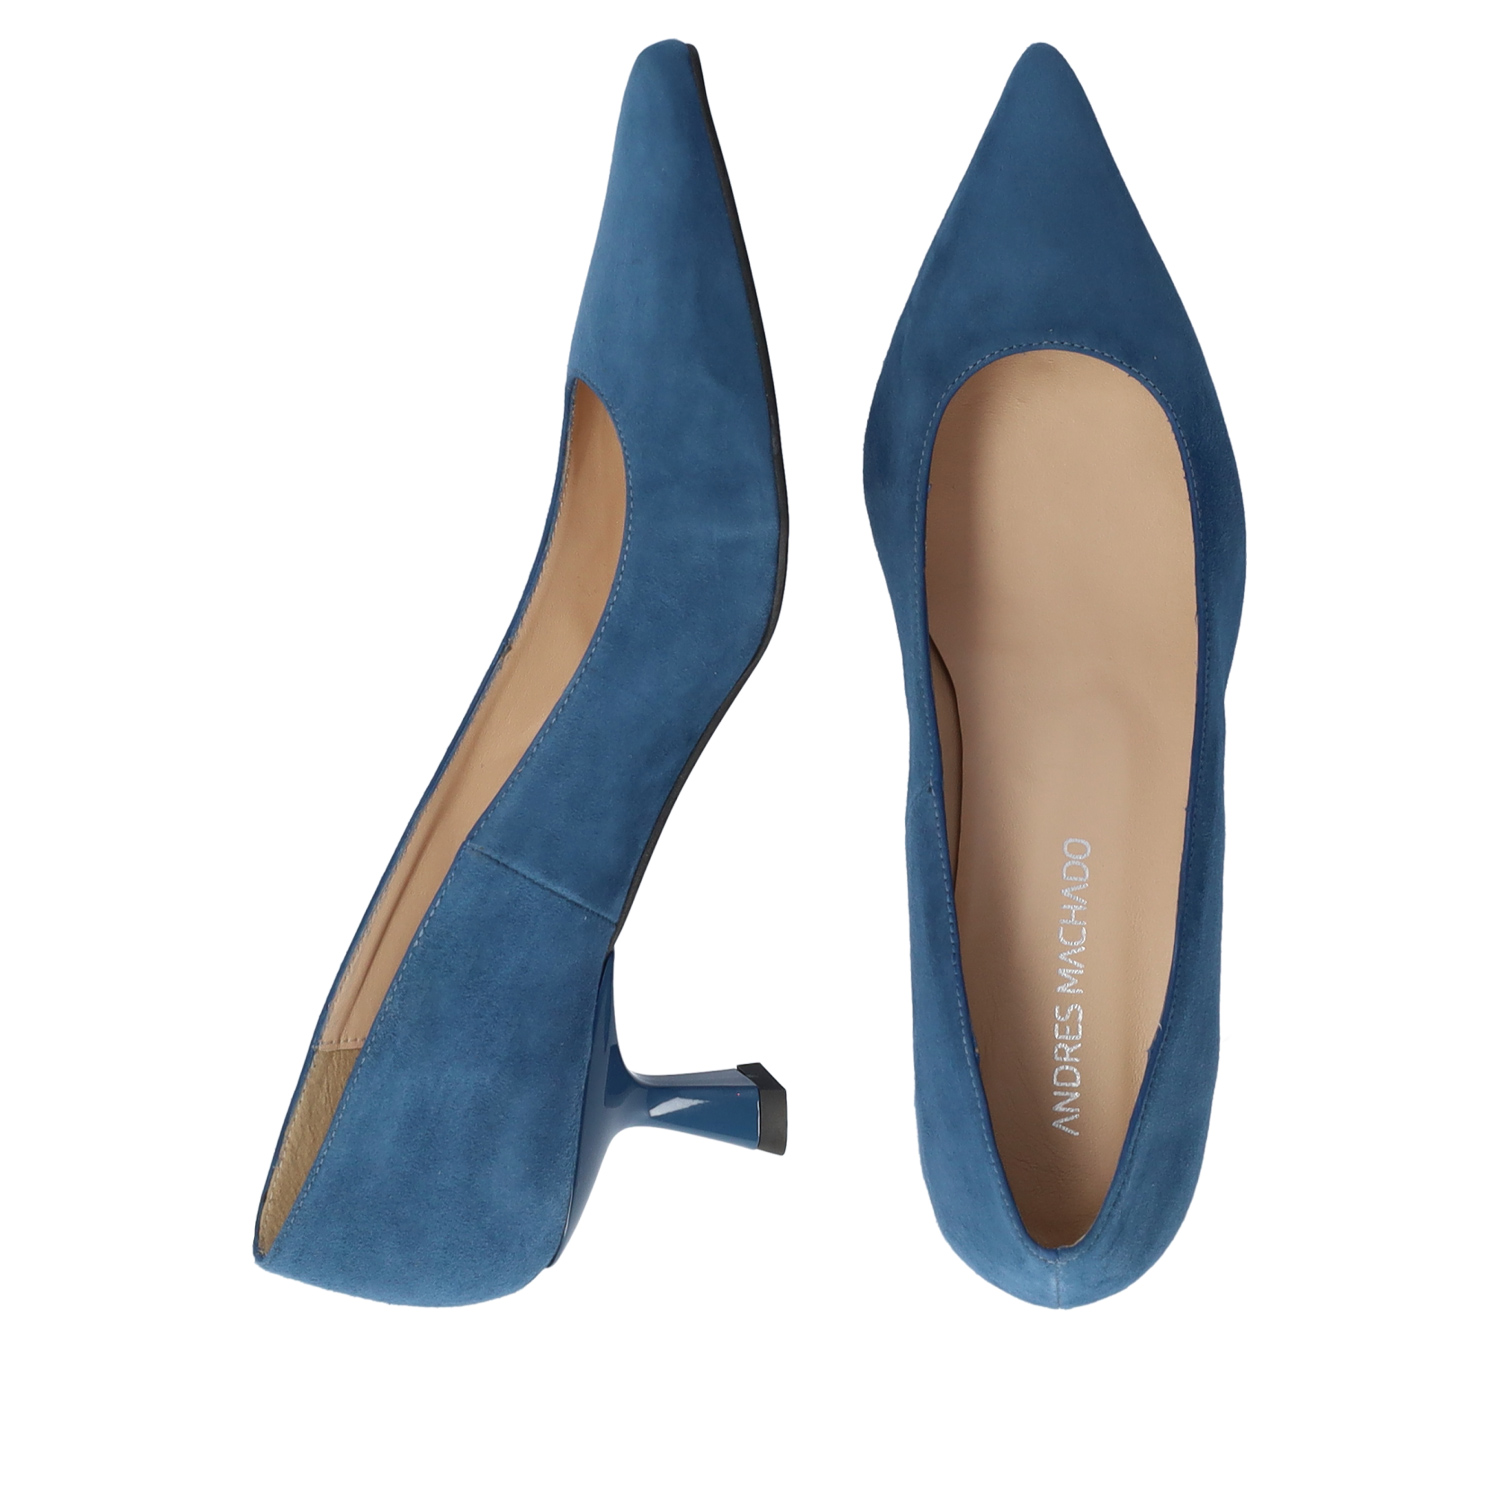 Heeled shoes in navy suede 